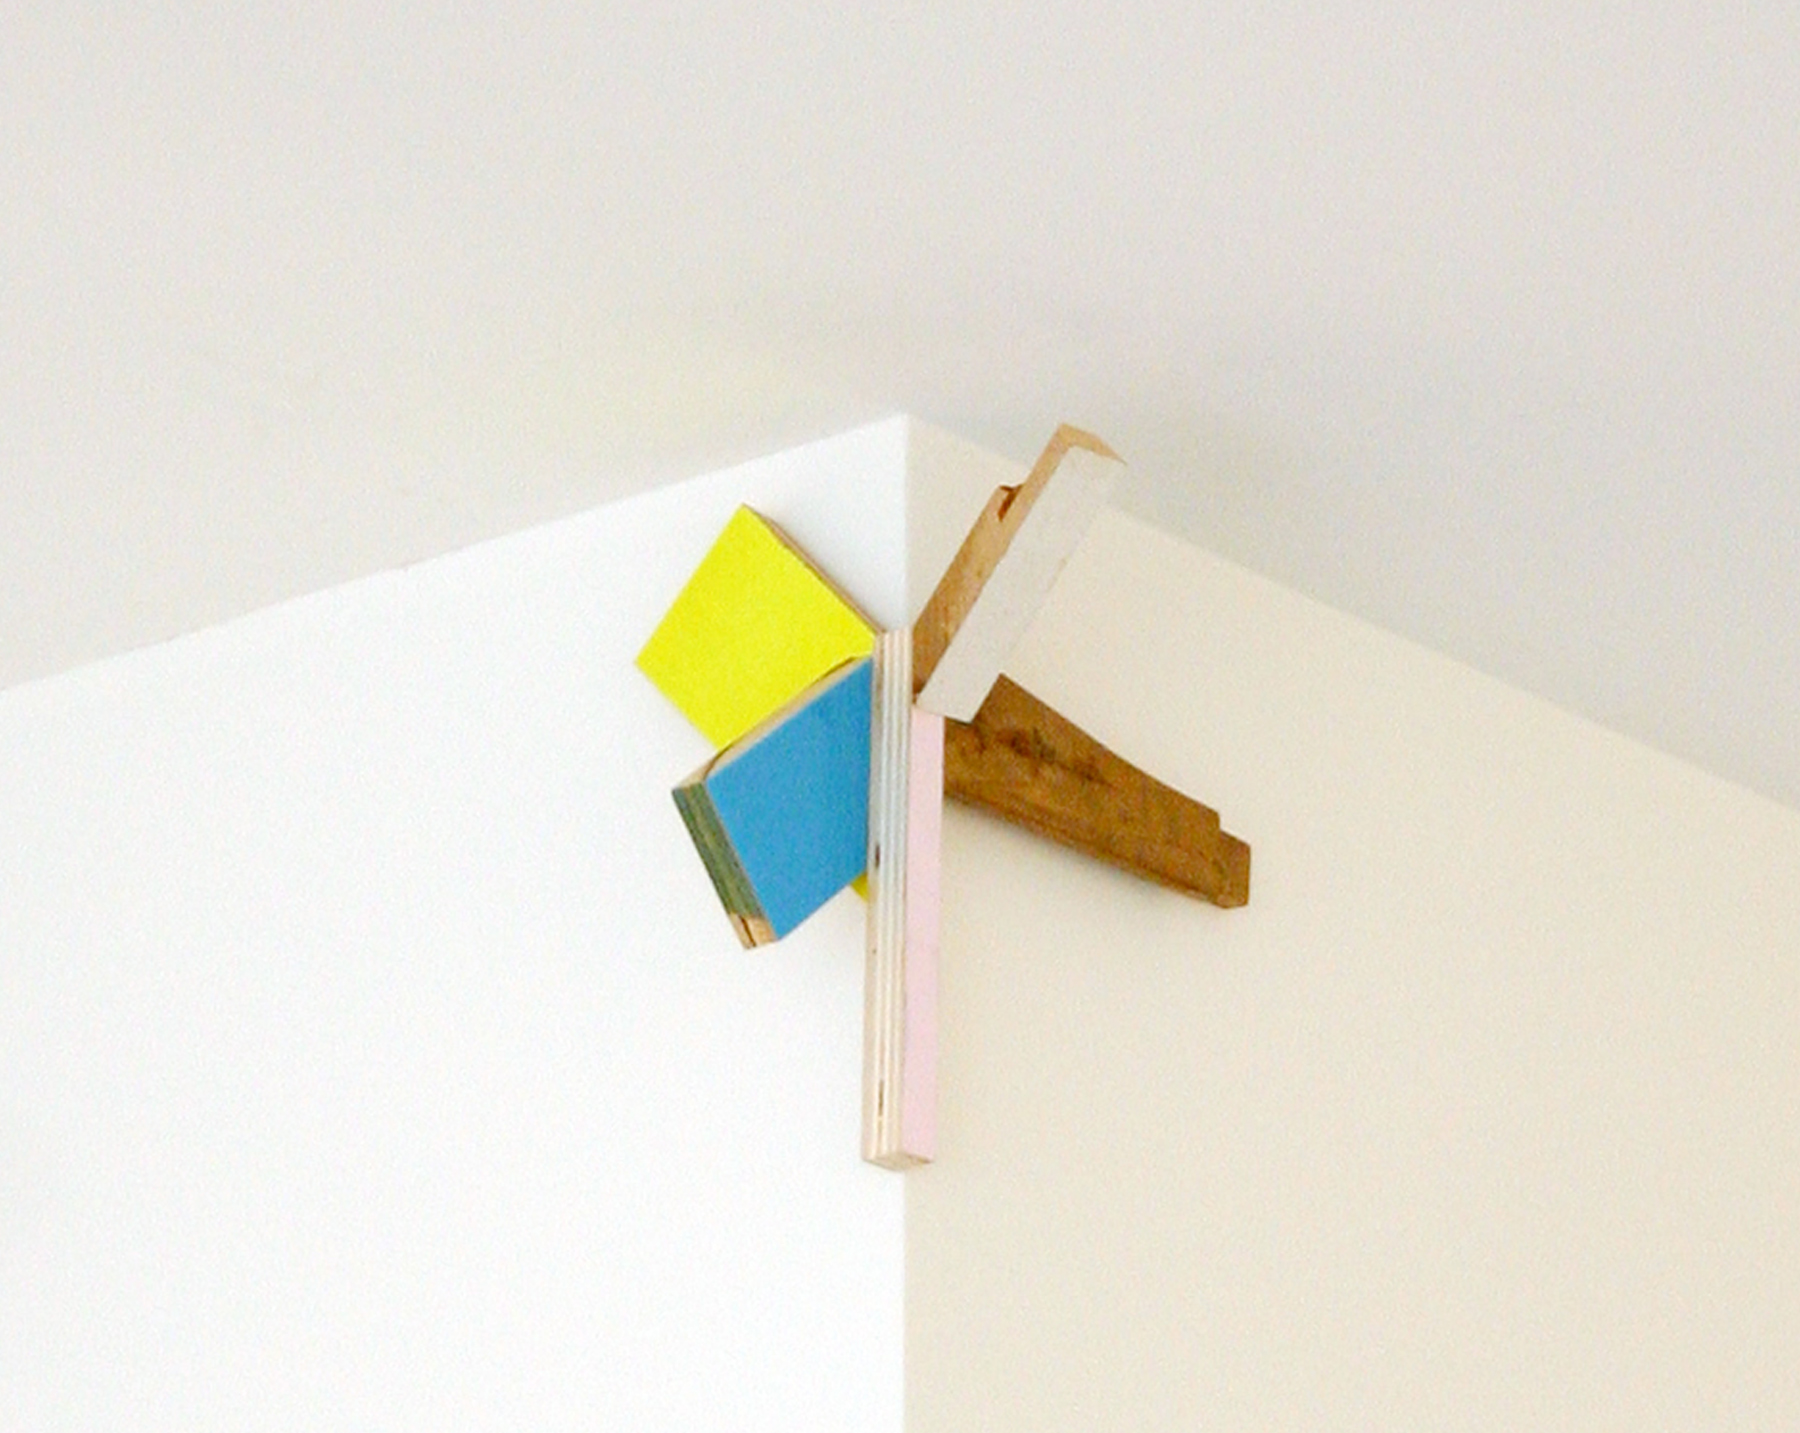   KIRK STOLLER   Untitled (reach),&nbsp; wood, resin and paint, 9.5" x 6" x 10", 2011 